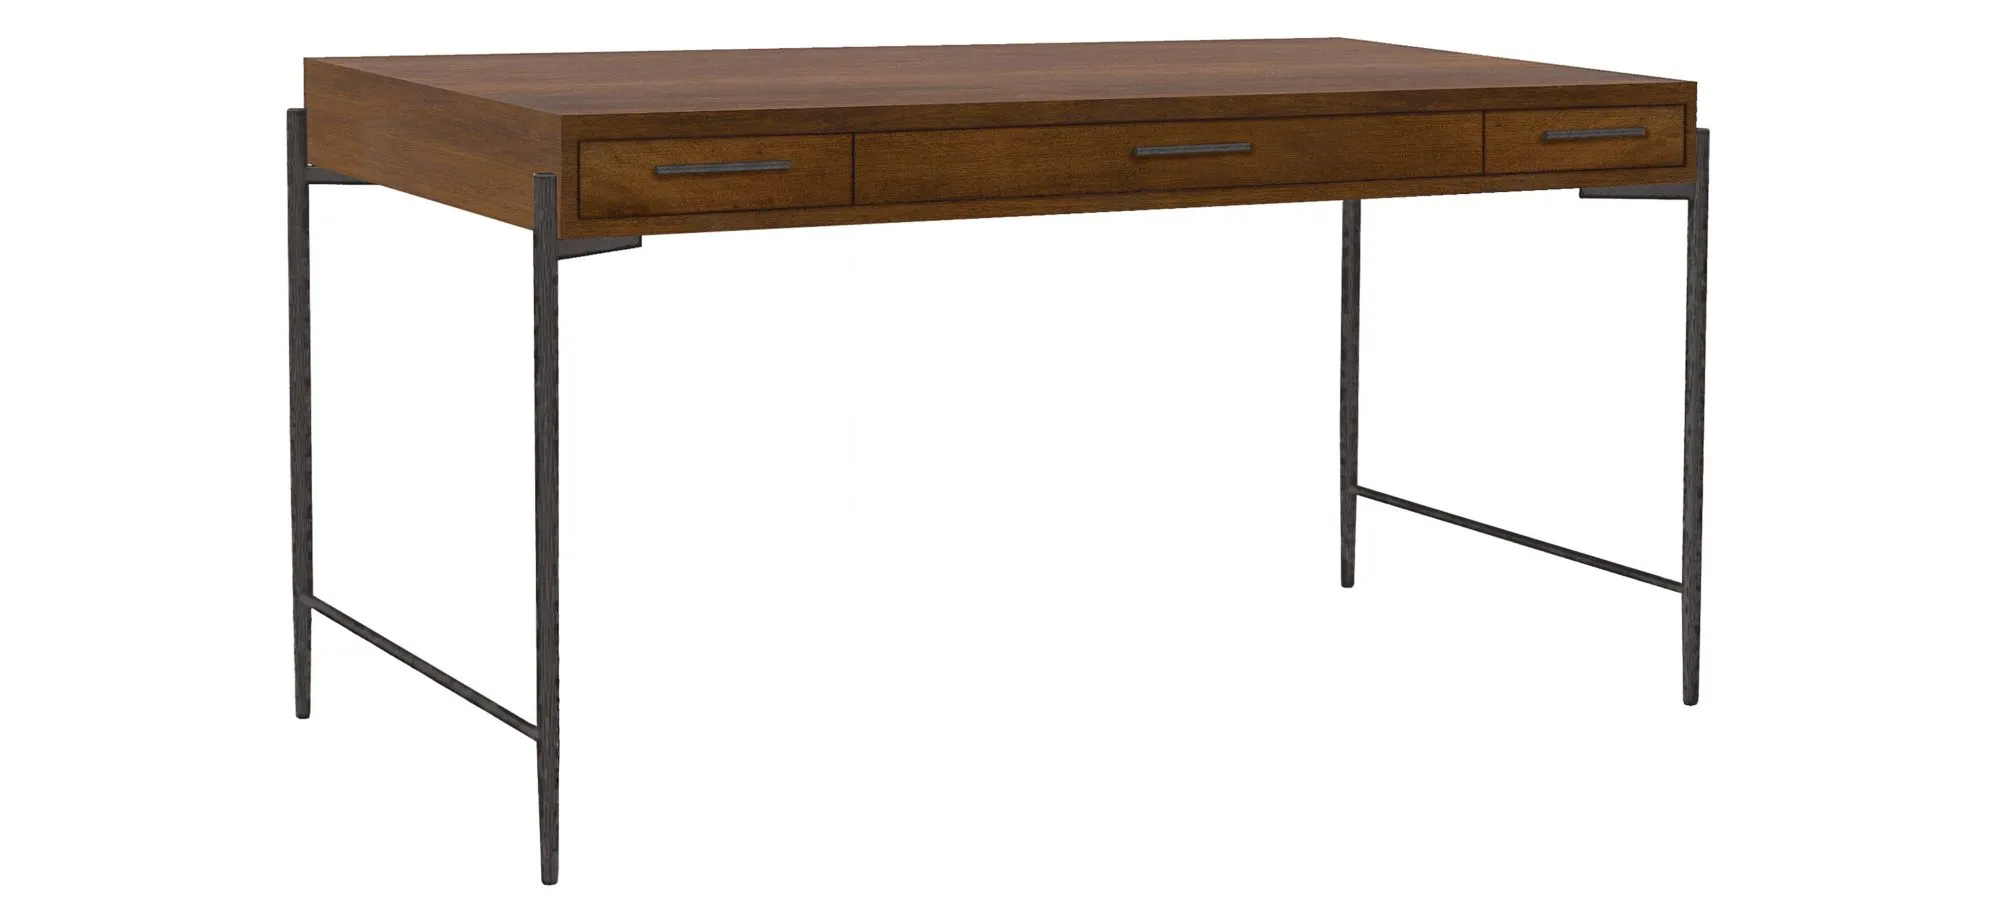 Bedford Park Desk in TOBACCO by Hekman Furniture Company